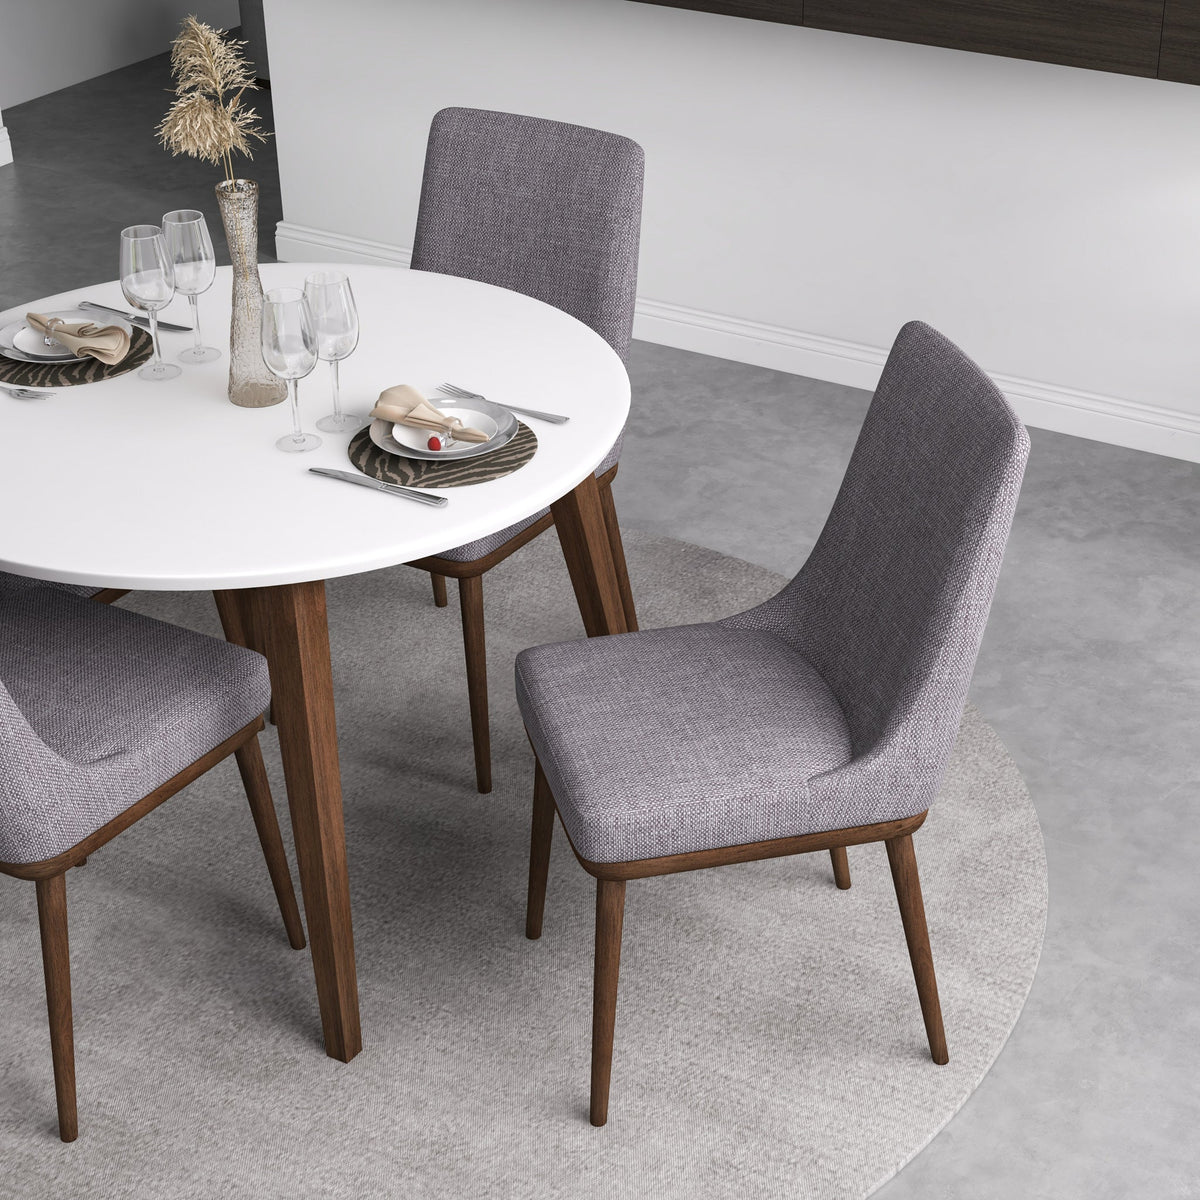 Palmer (White) Dining Set with 4 Brighton (Gray Fabric) Dining Chairs | Mid in Mod | Houston TX | Best Furniture stores in Houston